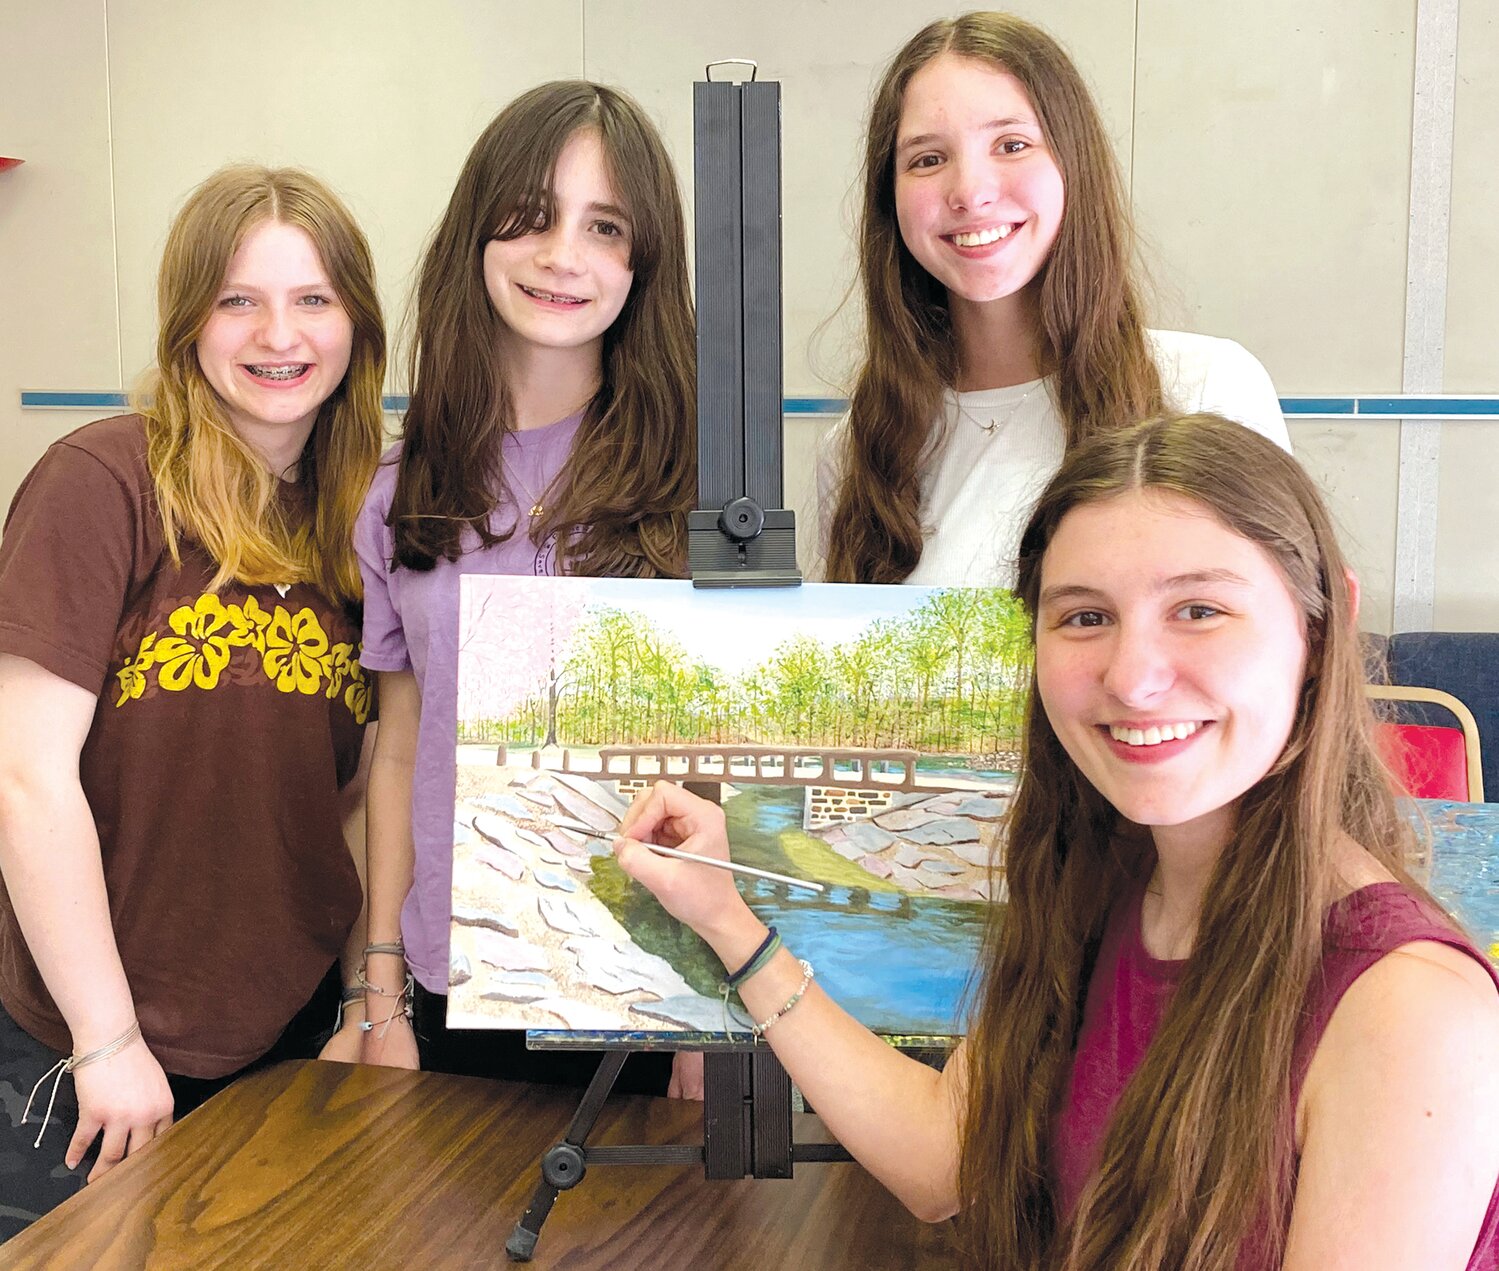 Victoria Cirillo, joined by Evangeline McGarry, Anna Sherwin, and Allison Cirillo, adds the finishing touches to “Springtime at Tyler Park.”